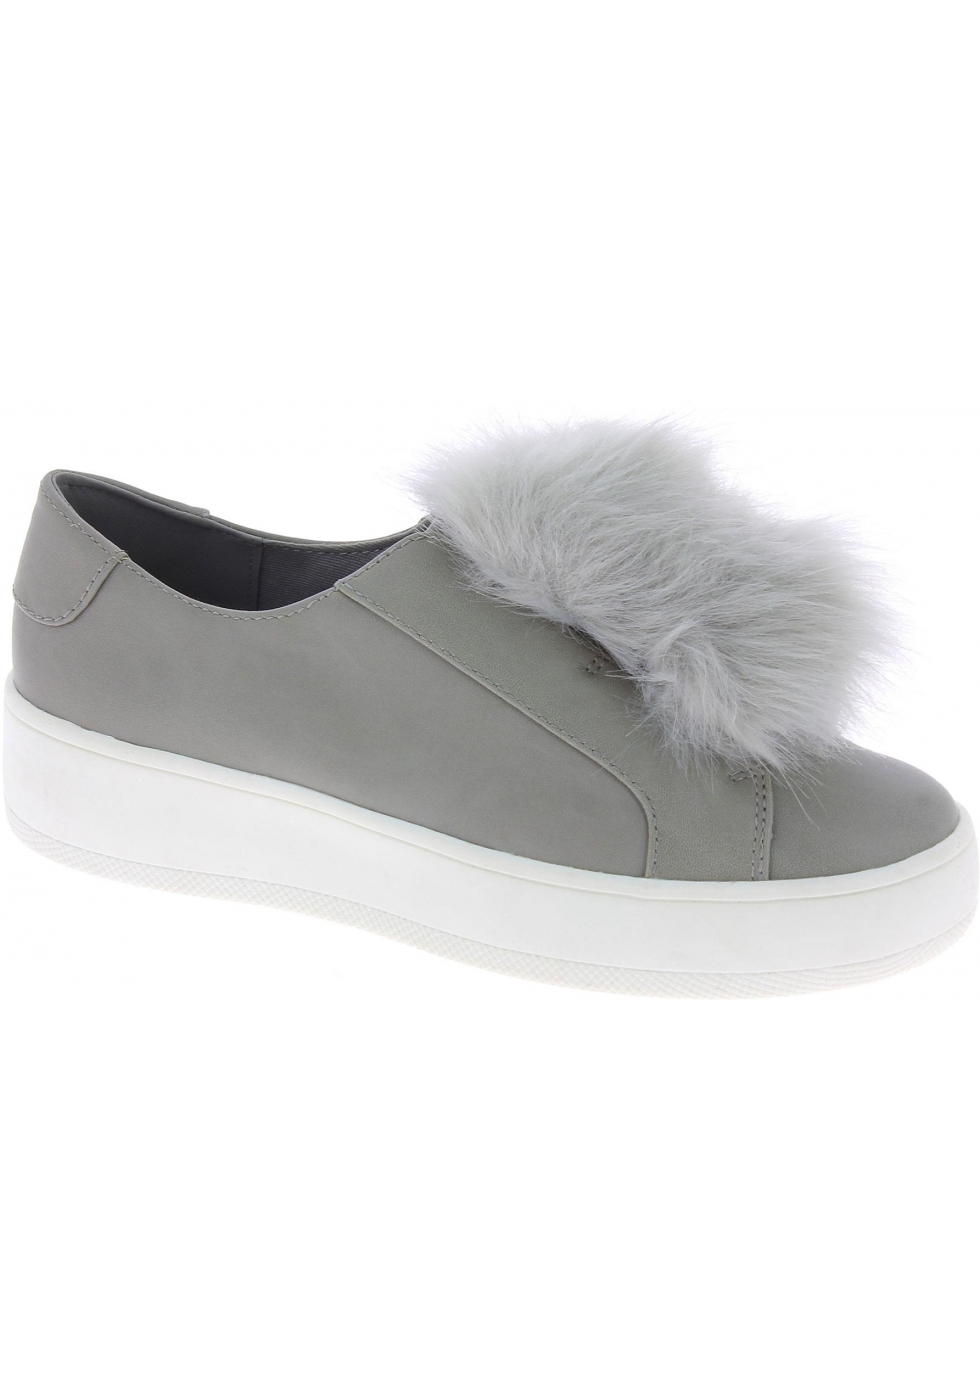 Steve Madden Women's platform laceless sneakers in gray faux leather with - Italian Boutique